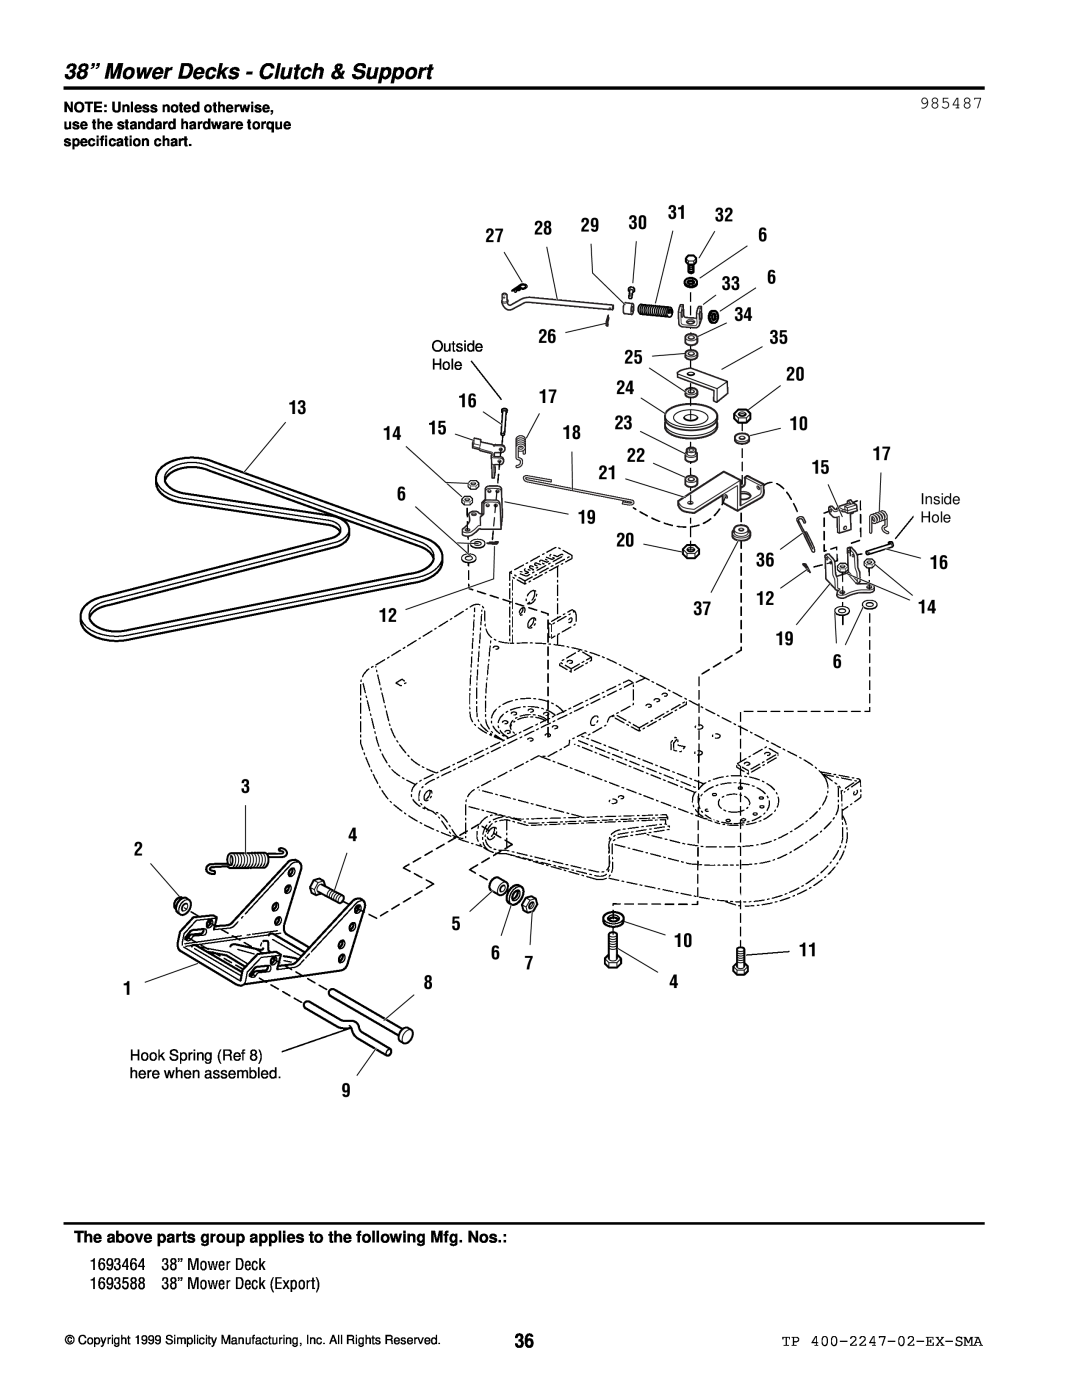 Simplicity Express Series 38” Mower Decks - Clutch & Support, 985487, TP 400-2247-02-EX-SMA, NOTE Unless noted otherwise 